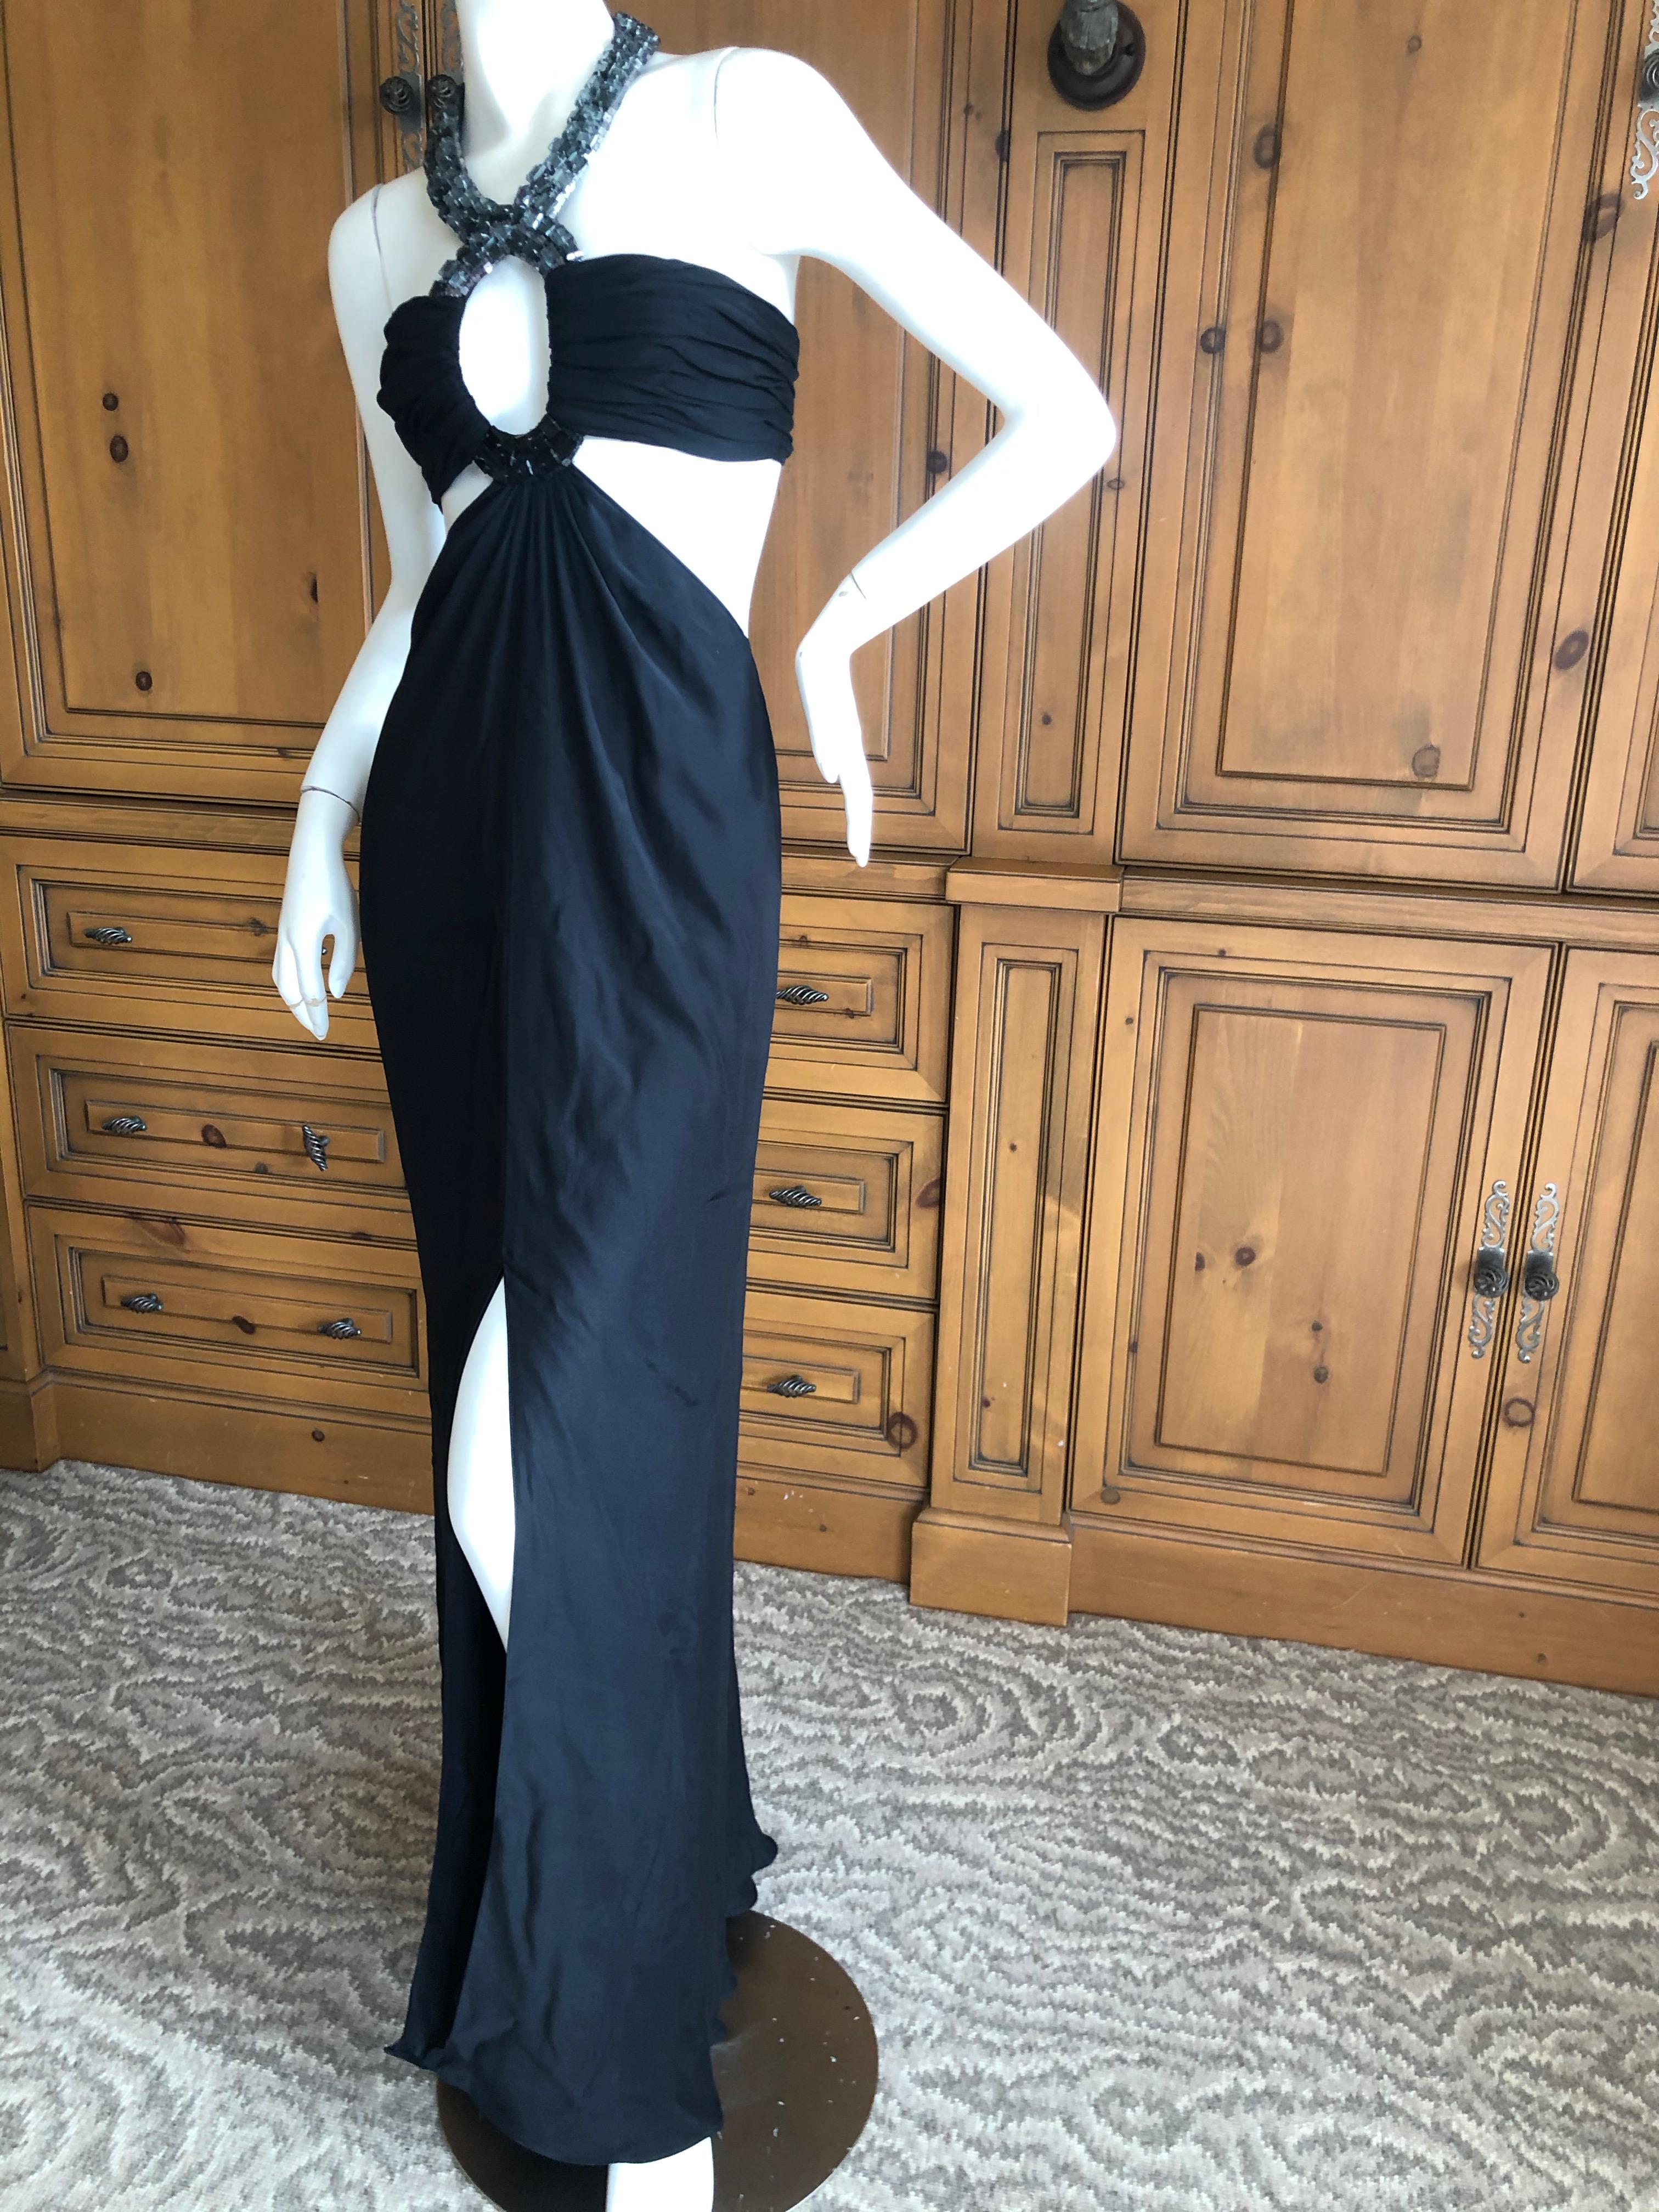 Azzaro Black Cut Out Evening Dress with Bold Crystal Jewel Details In Excellent Condition For Sale In Cloverdale, CA